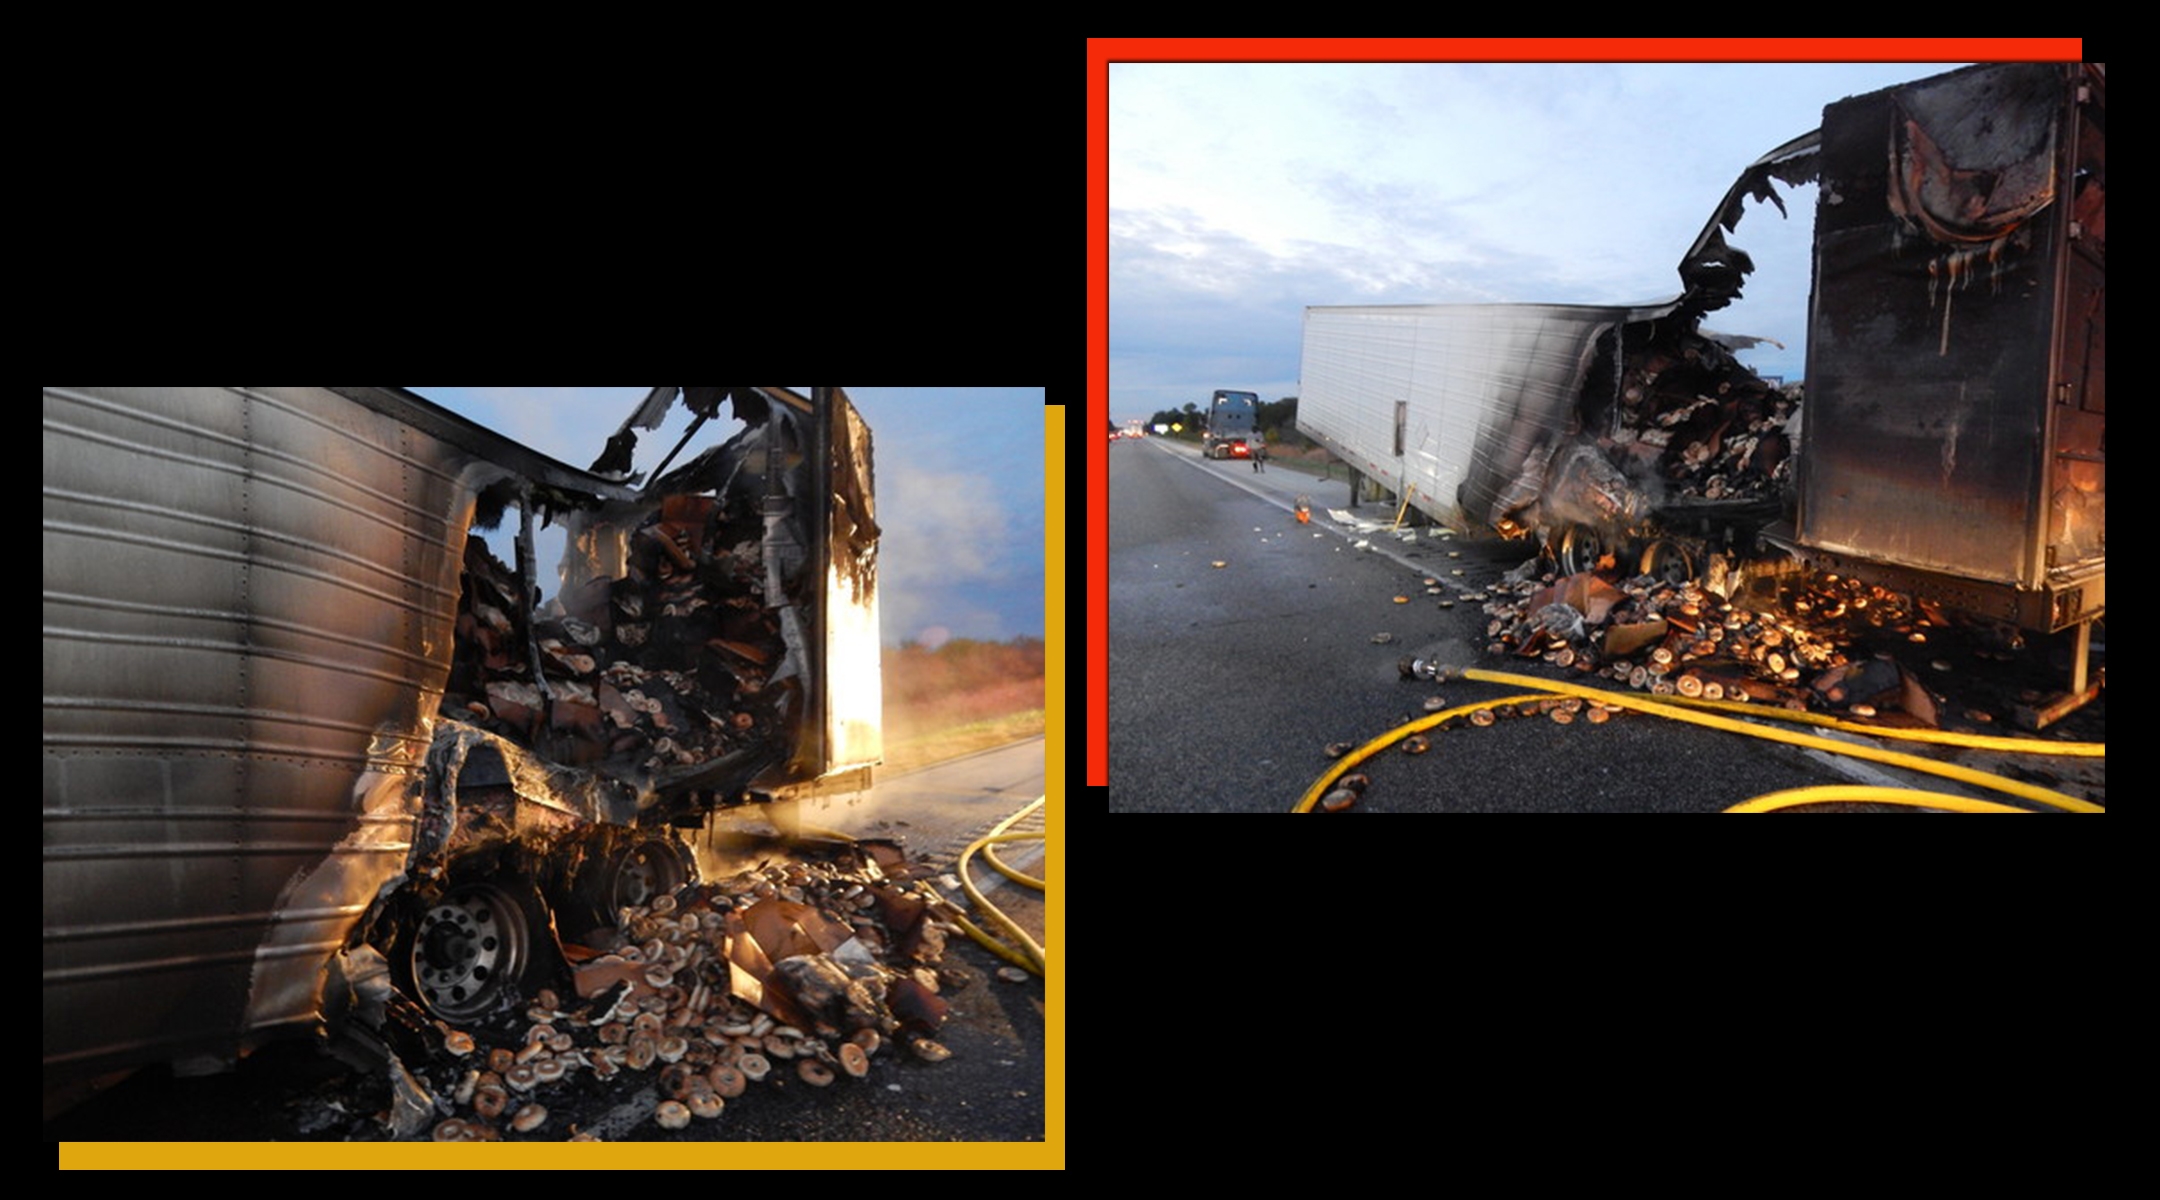 The circular cargo went up in flames when a rear axle caught on fire. (Courtesy of the Indiana State Police)